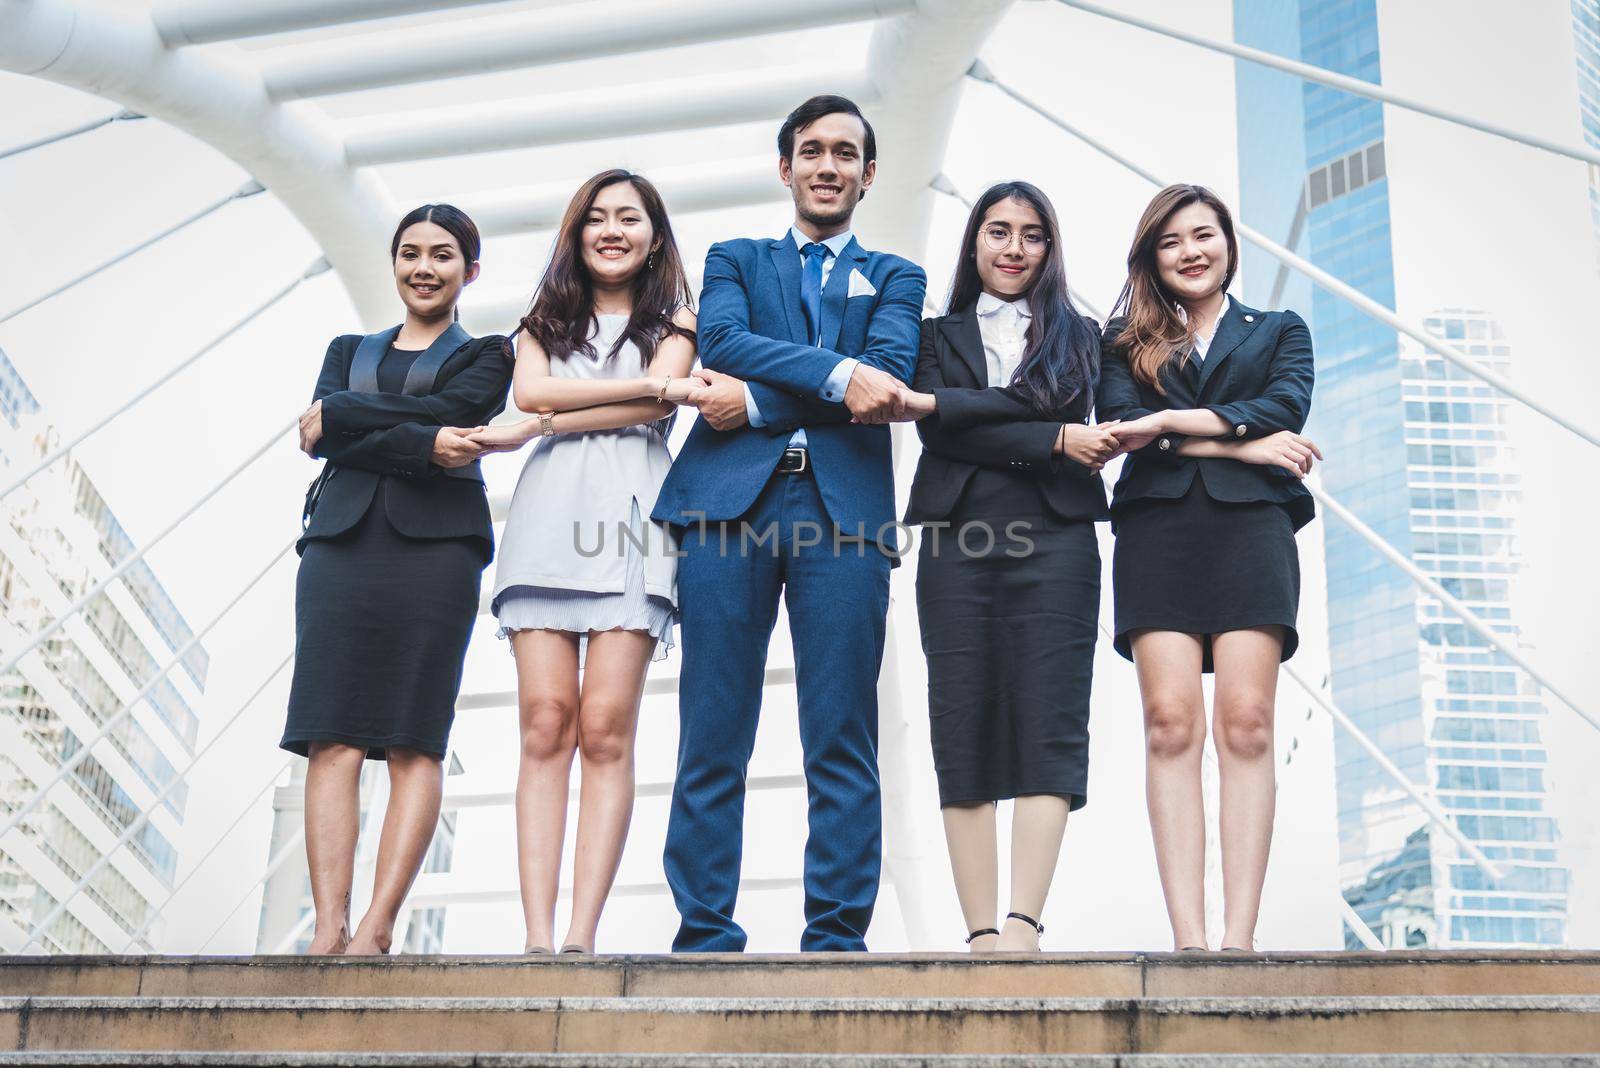 Portrait of successful group of business people at outdoor urban. Happy businessmen and businesswomen standing as team in satisfaction gesture. Successful group of people smiling and looking at camera